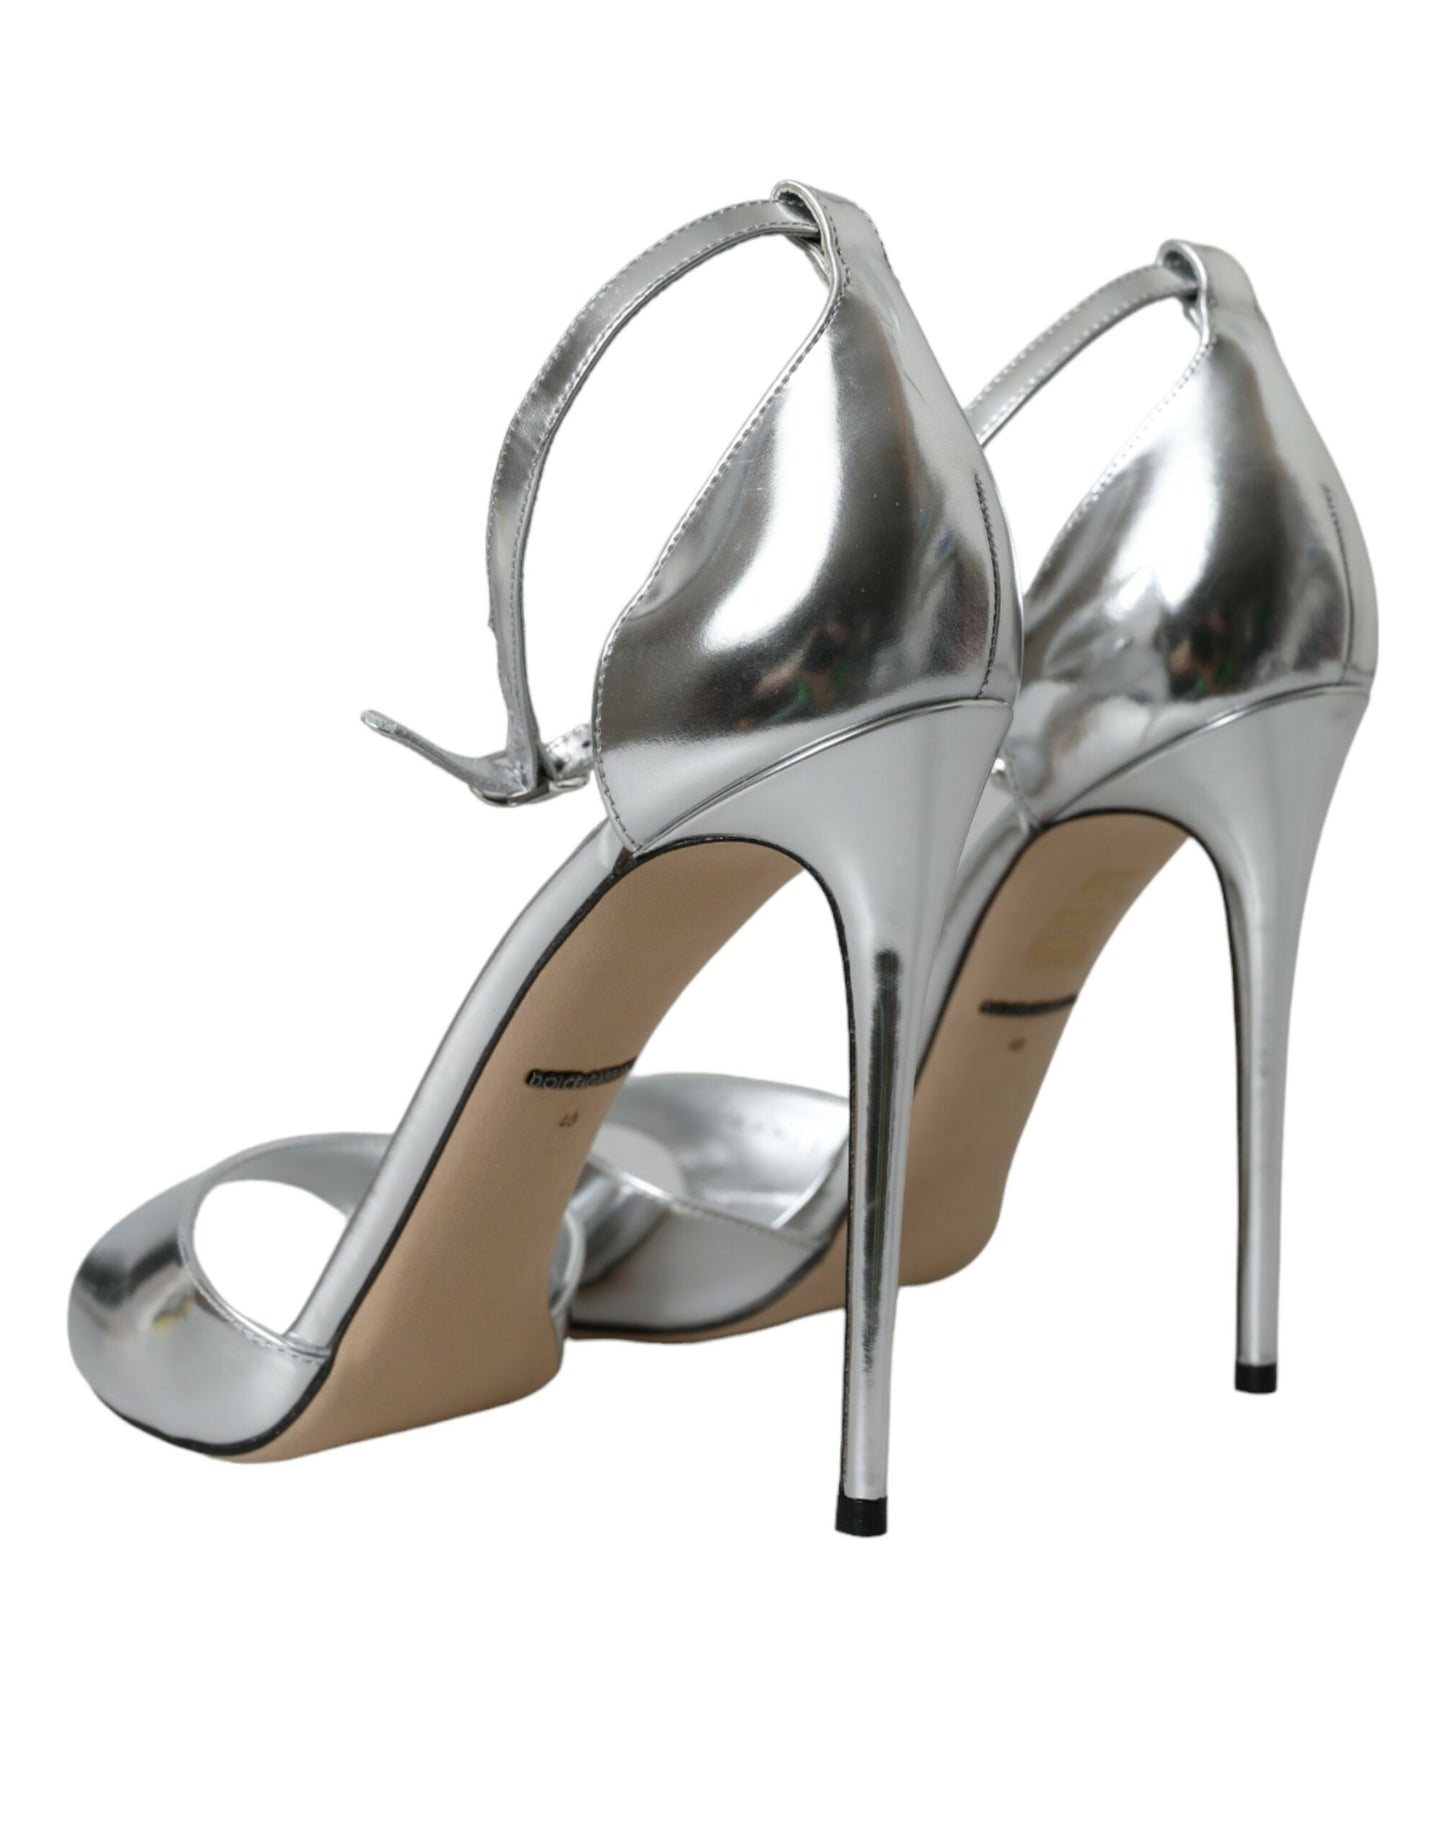 Silver KEIRA Leather Heels Sandals Shoes